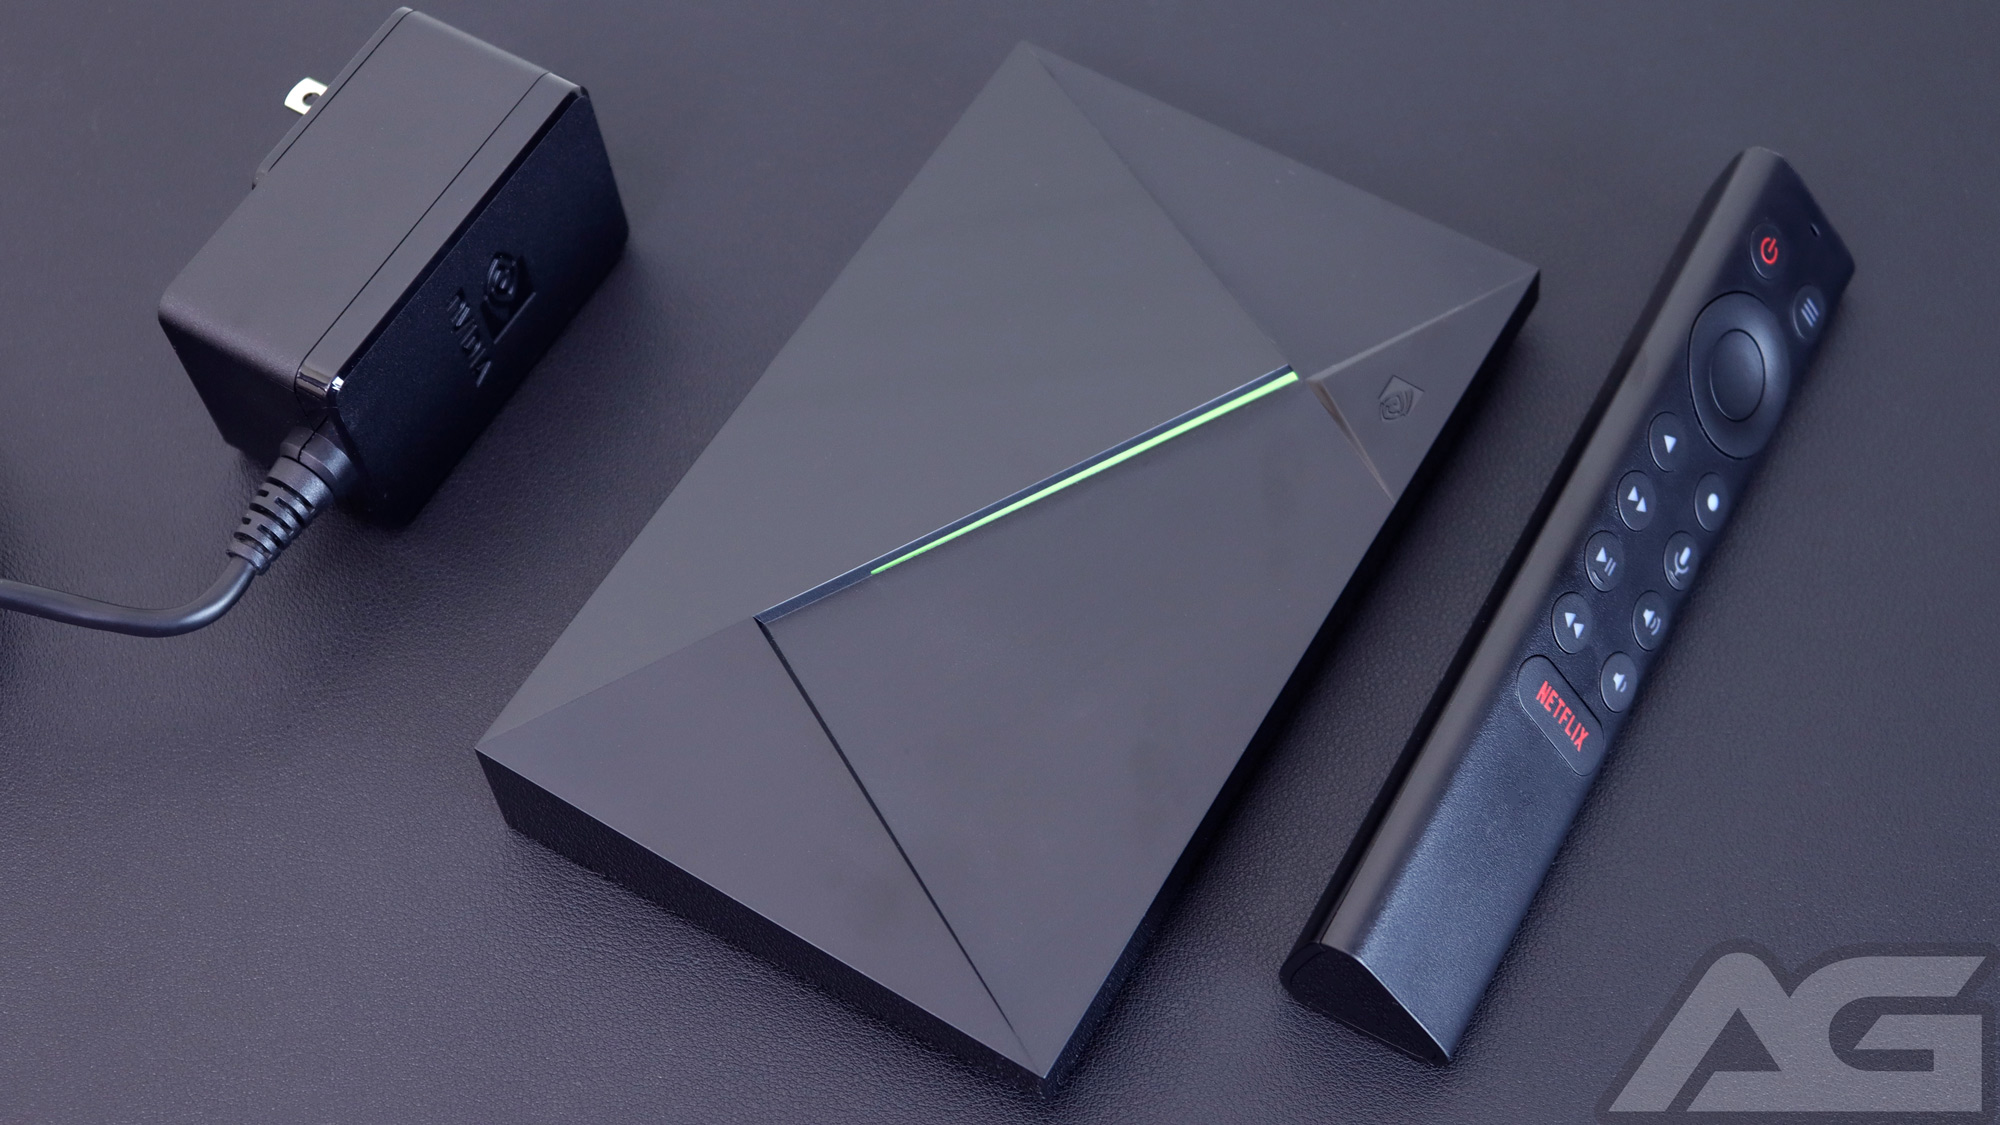 Nvidia Shield TV Pro (2019) review: The most powerful media